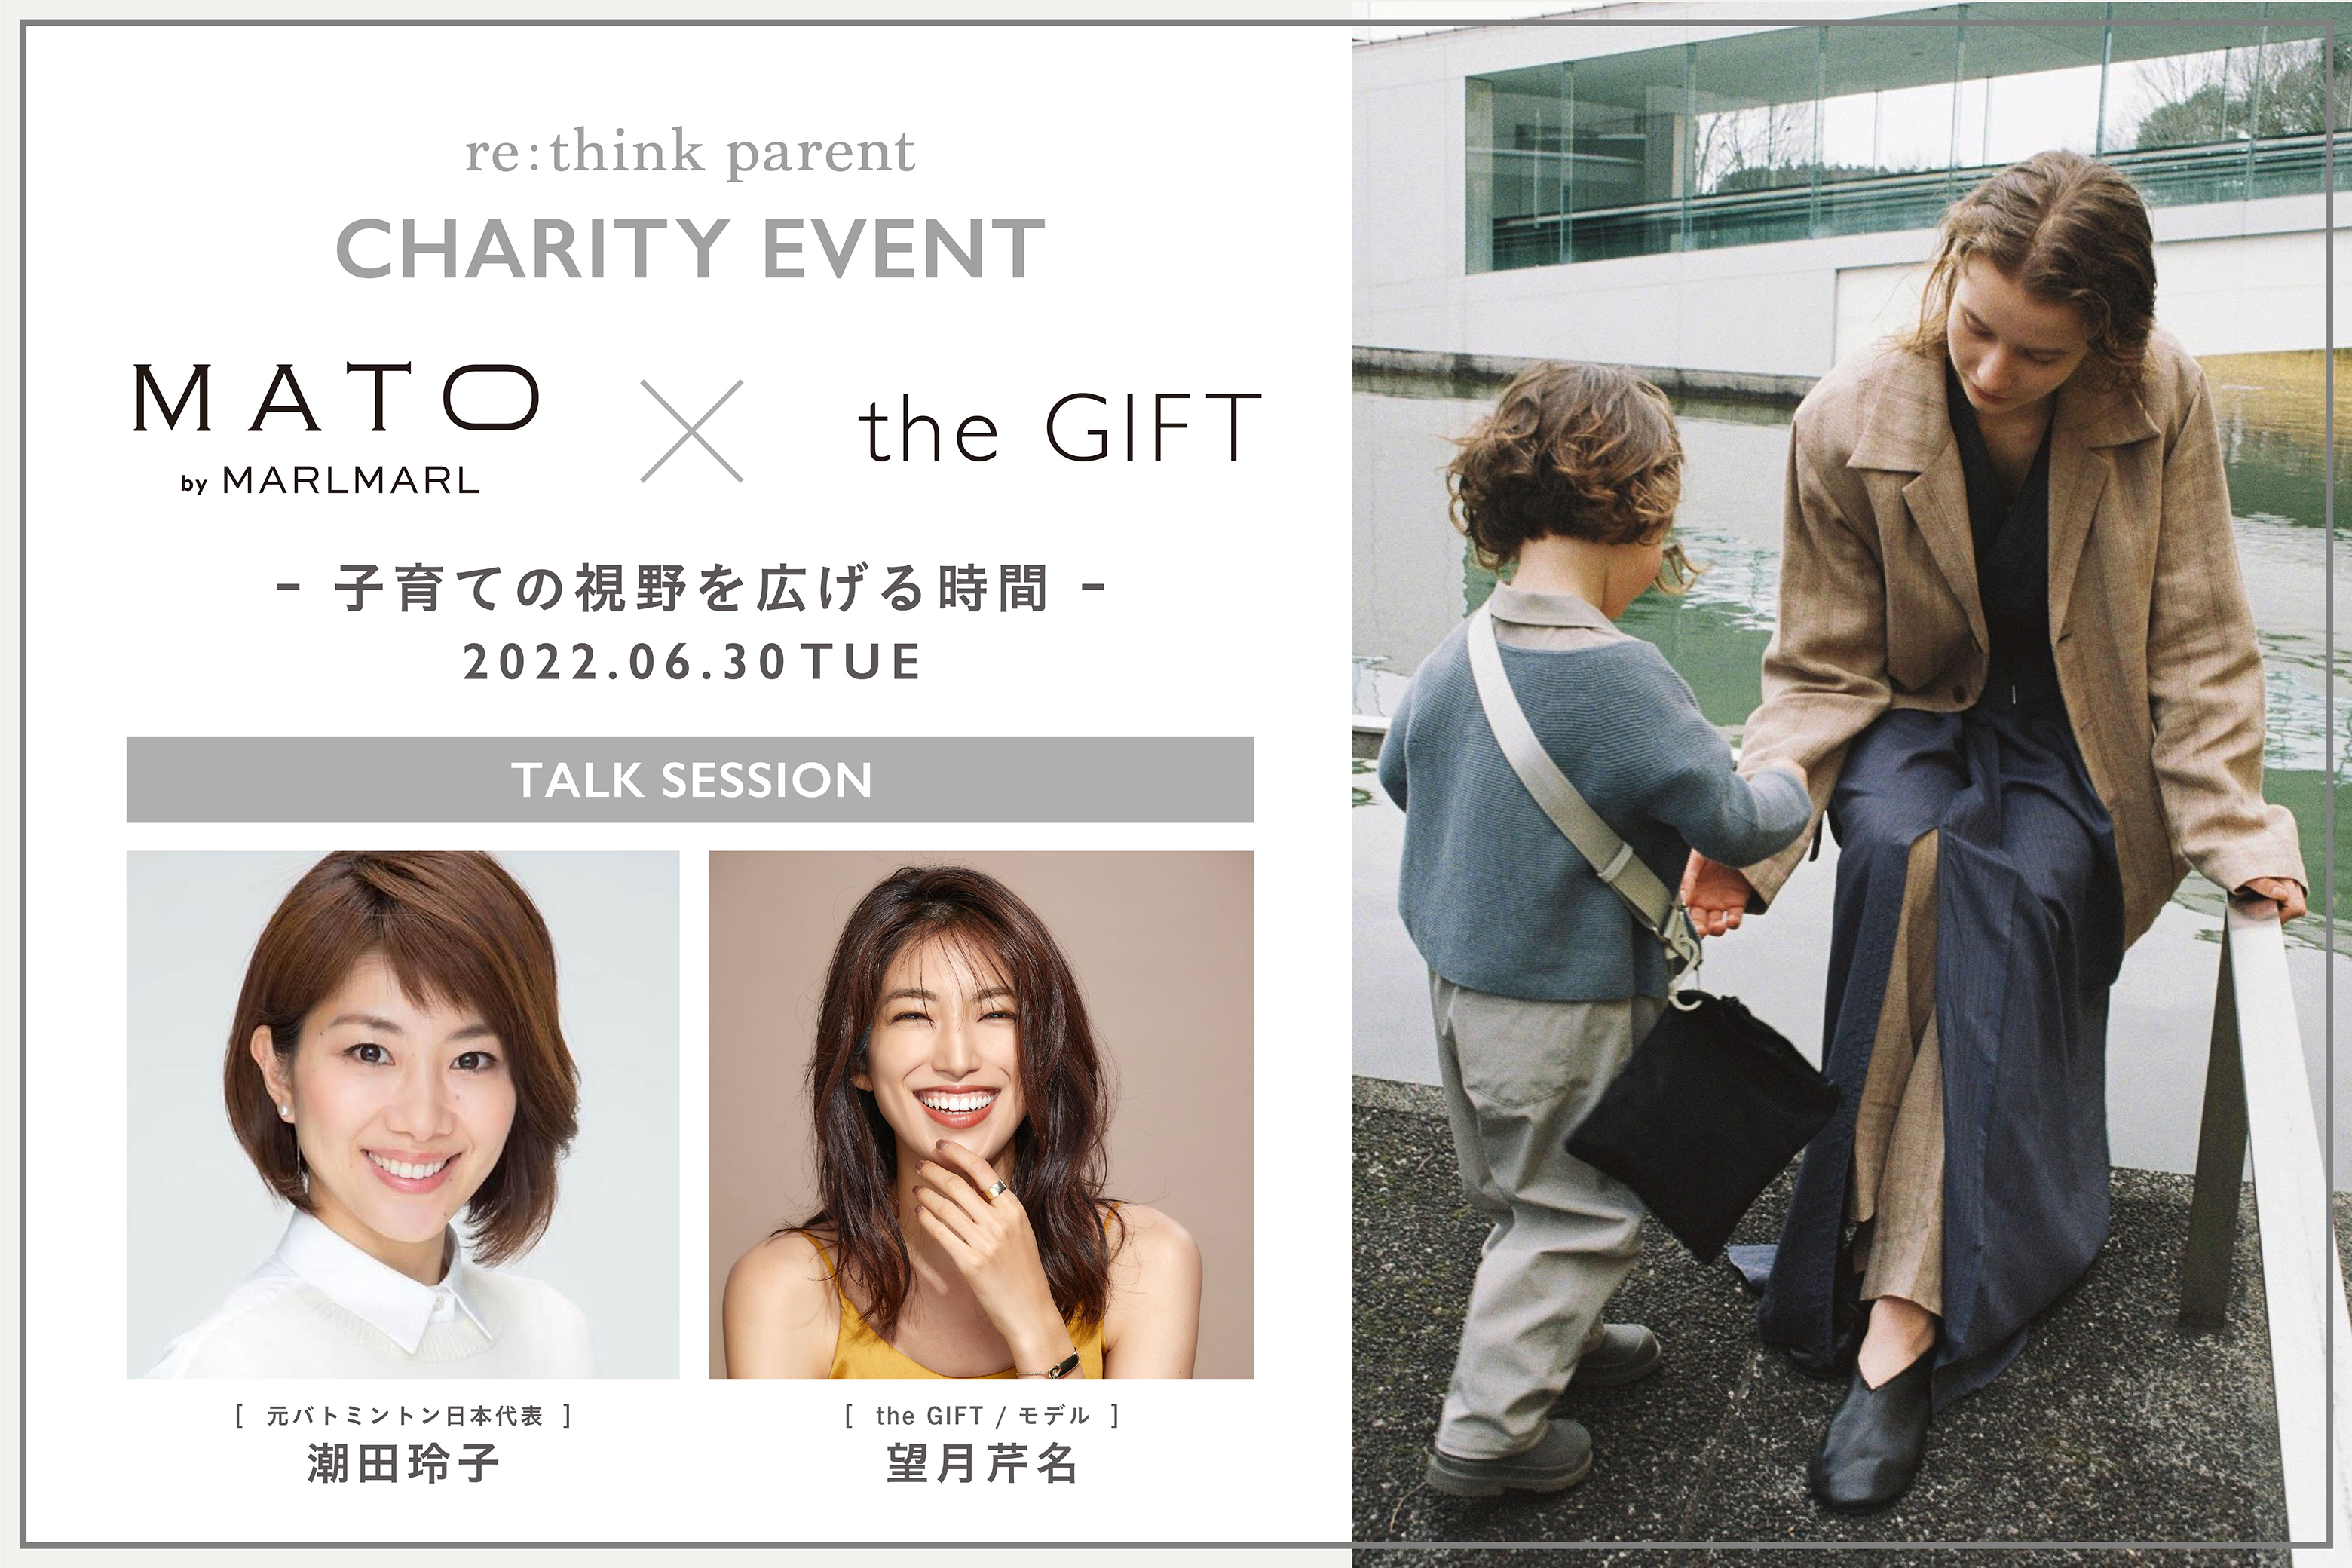 MATO by MARLMARL × the GIFT re:think parent チャリティーイベント開催！